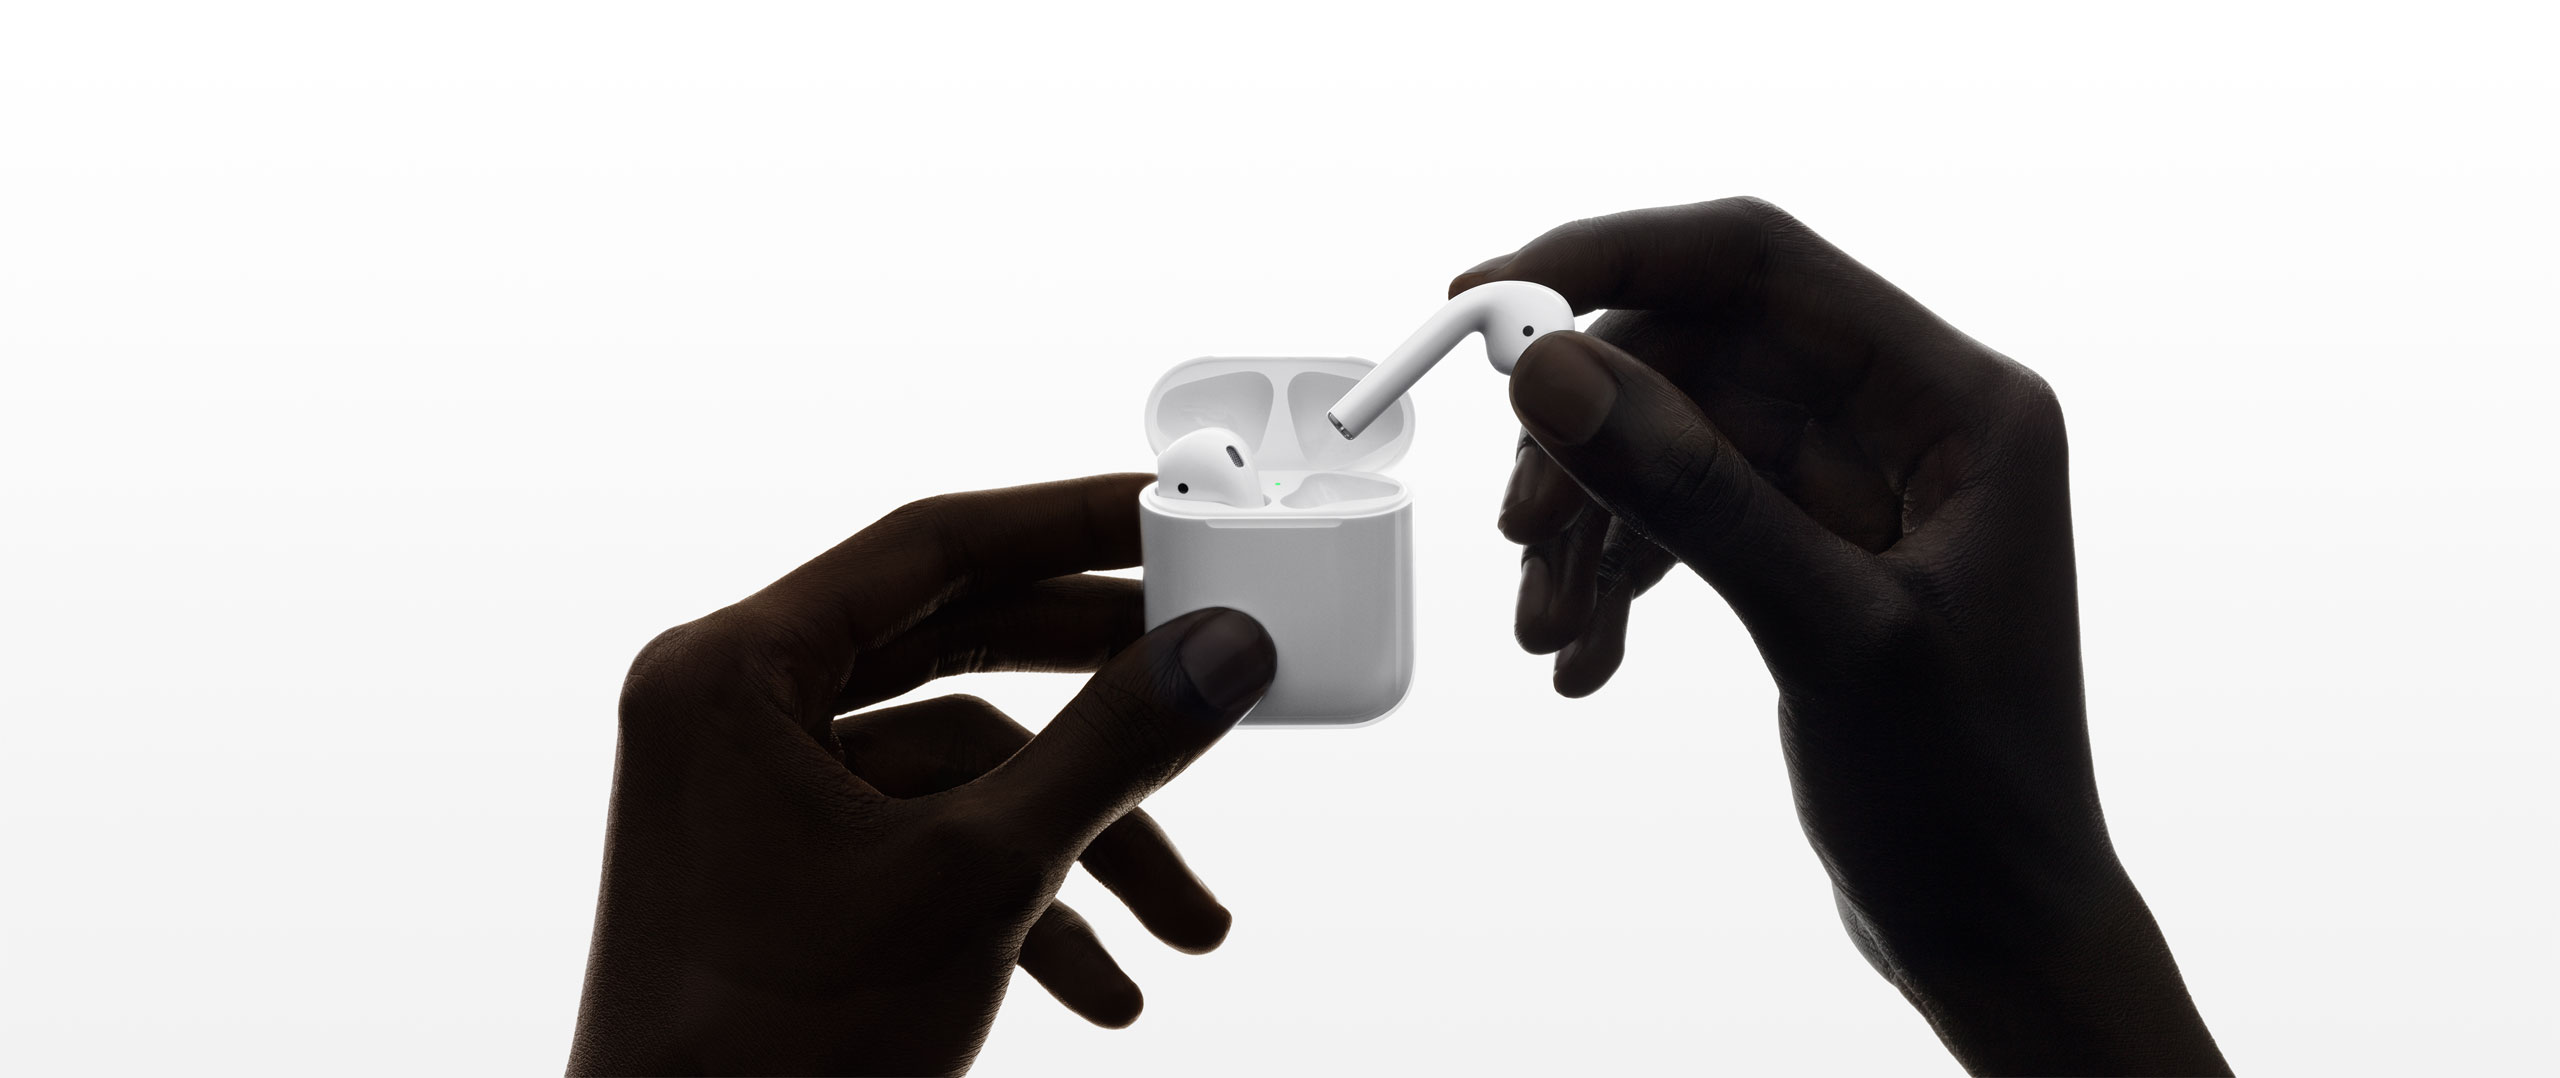 https://www.apple.com/v/airpods-2nd-generation/e/images/overview/battery__f8c24btnp5ei_large.jpg